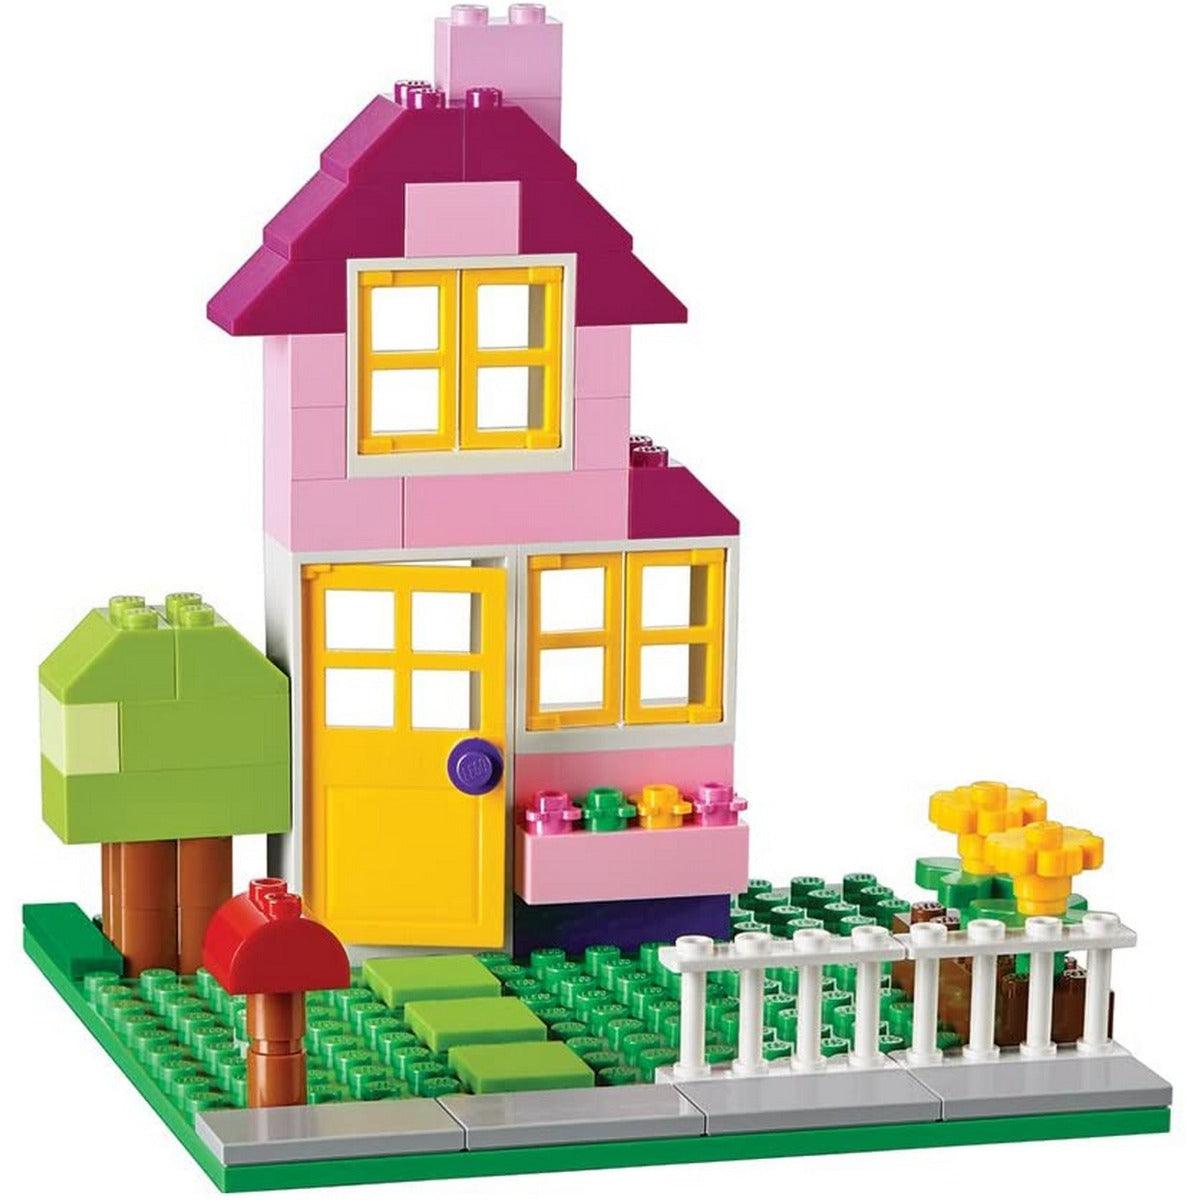 Vibrant Creative Brick Box 11038 | Classic | Buy online at the Official  LEGO® Shop US